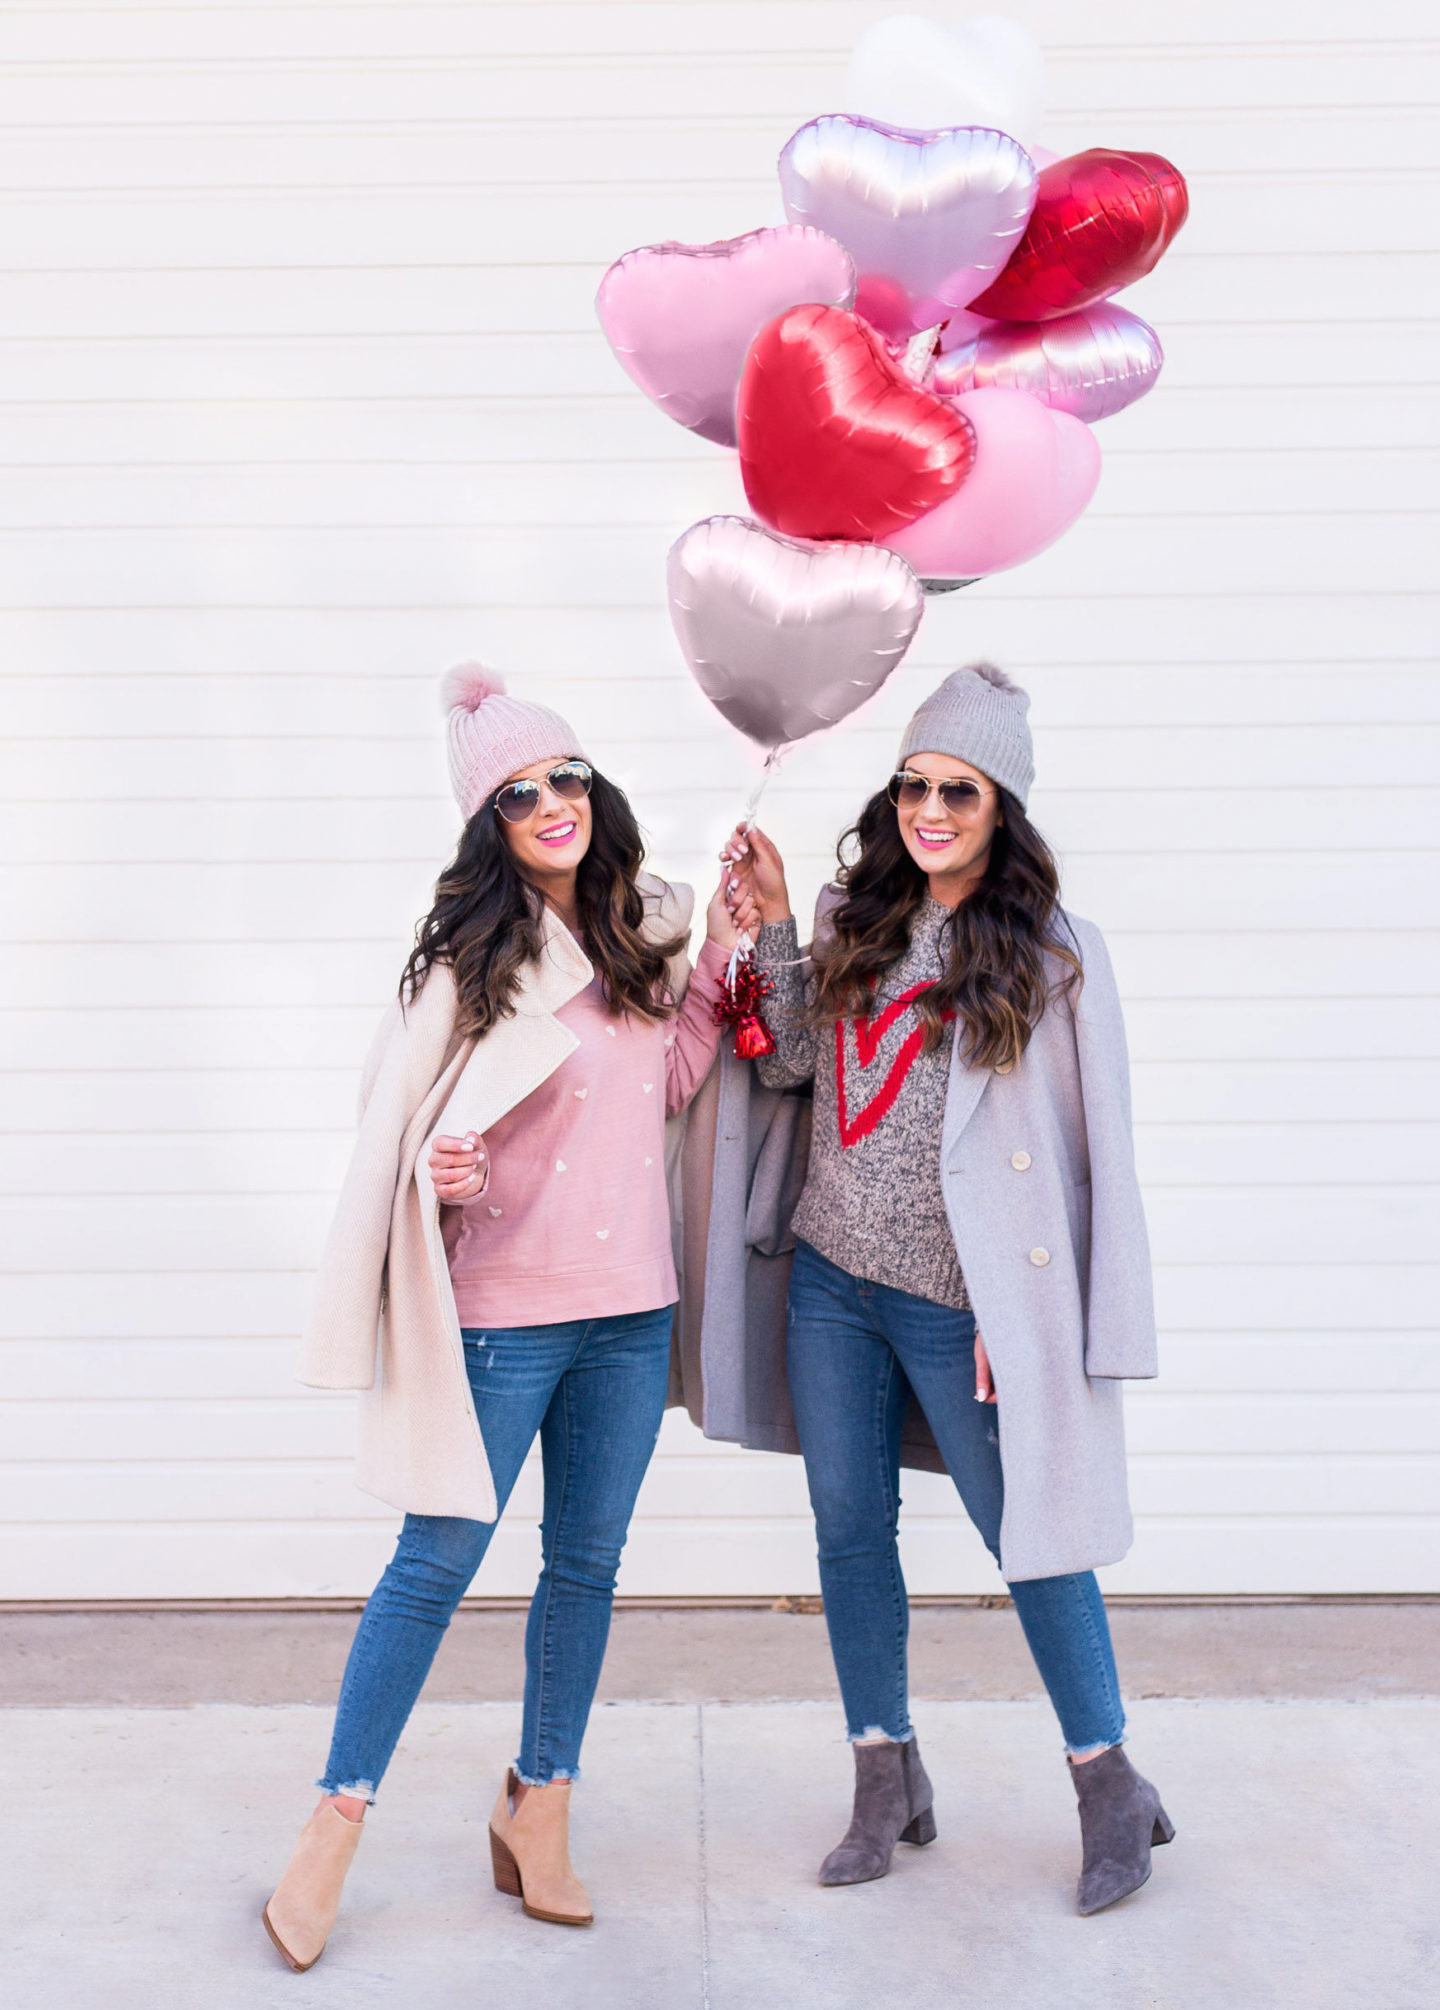 LOFT Weekend Sale + Valentine's Outfit Ideas! - The Double Take Girls